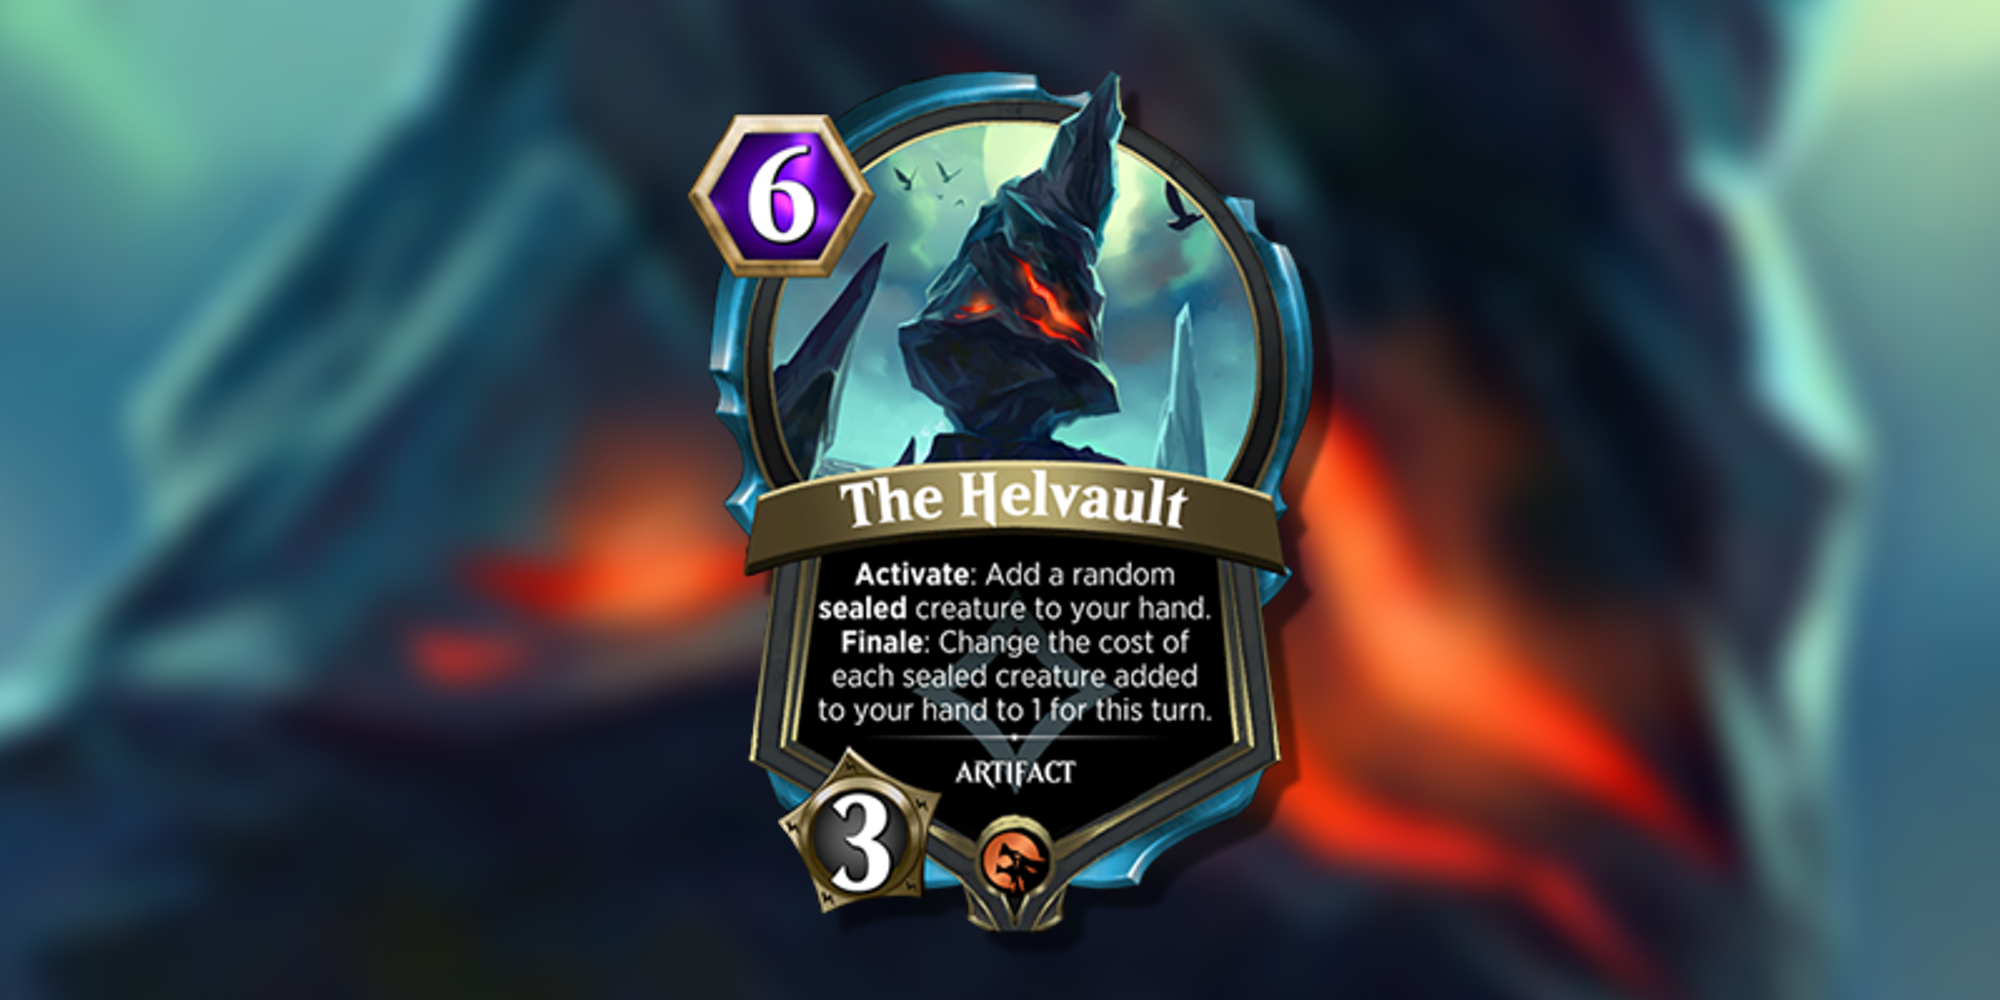 The Helvault